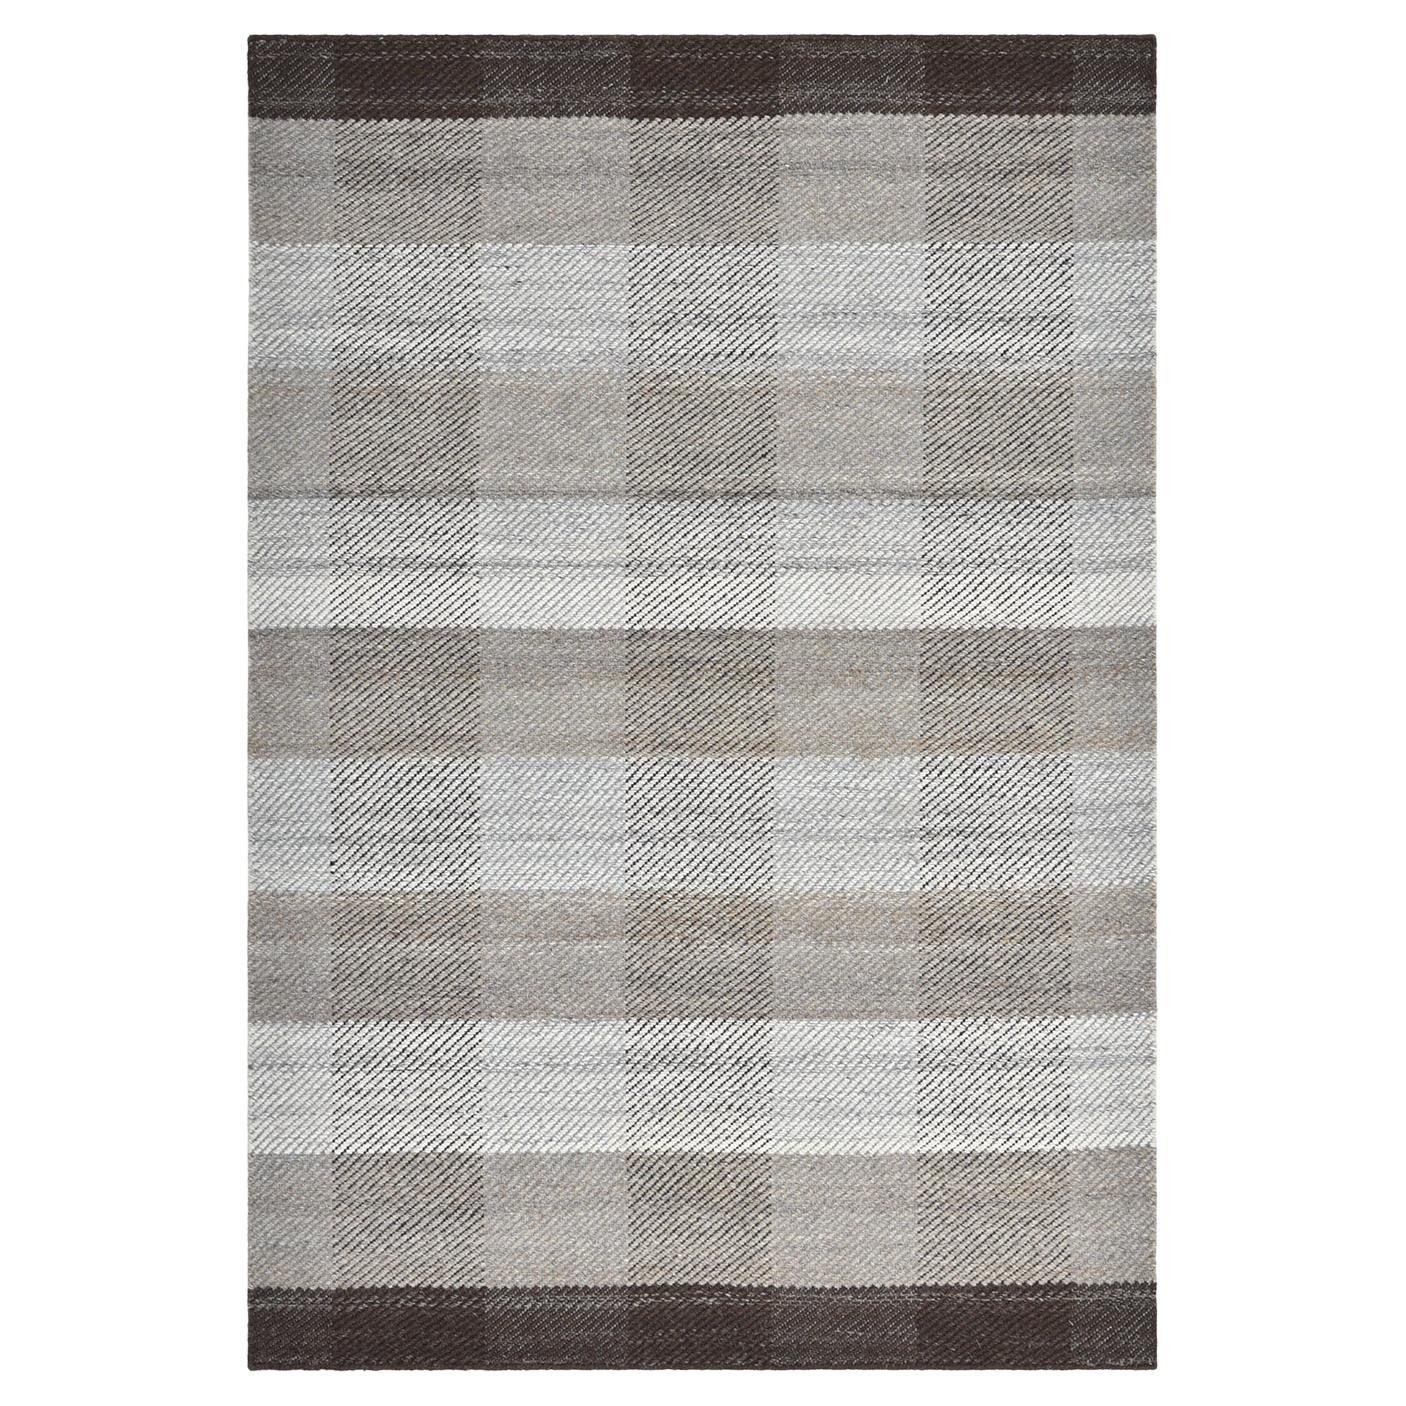 Solo Rugs Flatweave Checkered Hand Woven Brown Area Rug For Sale